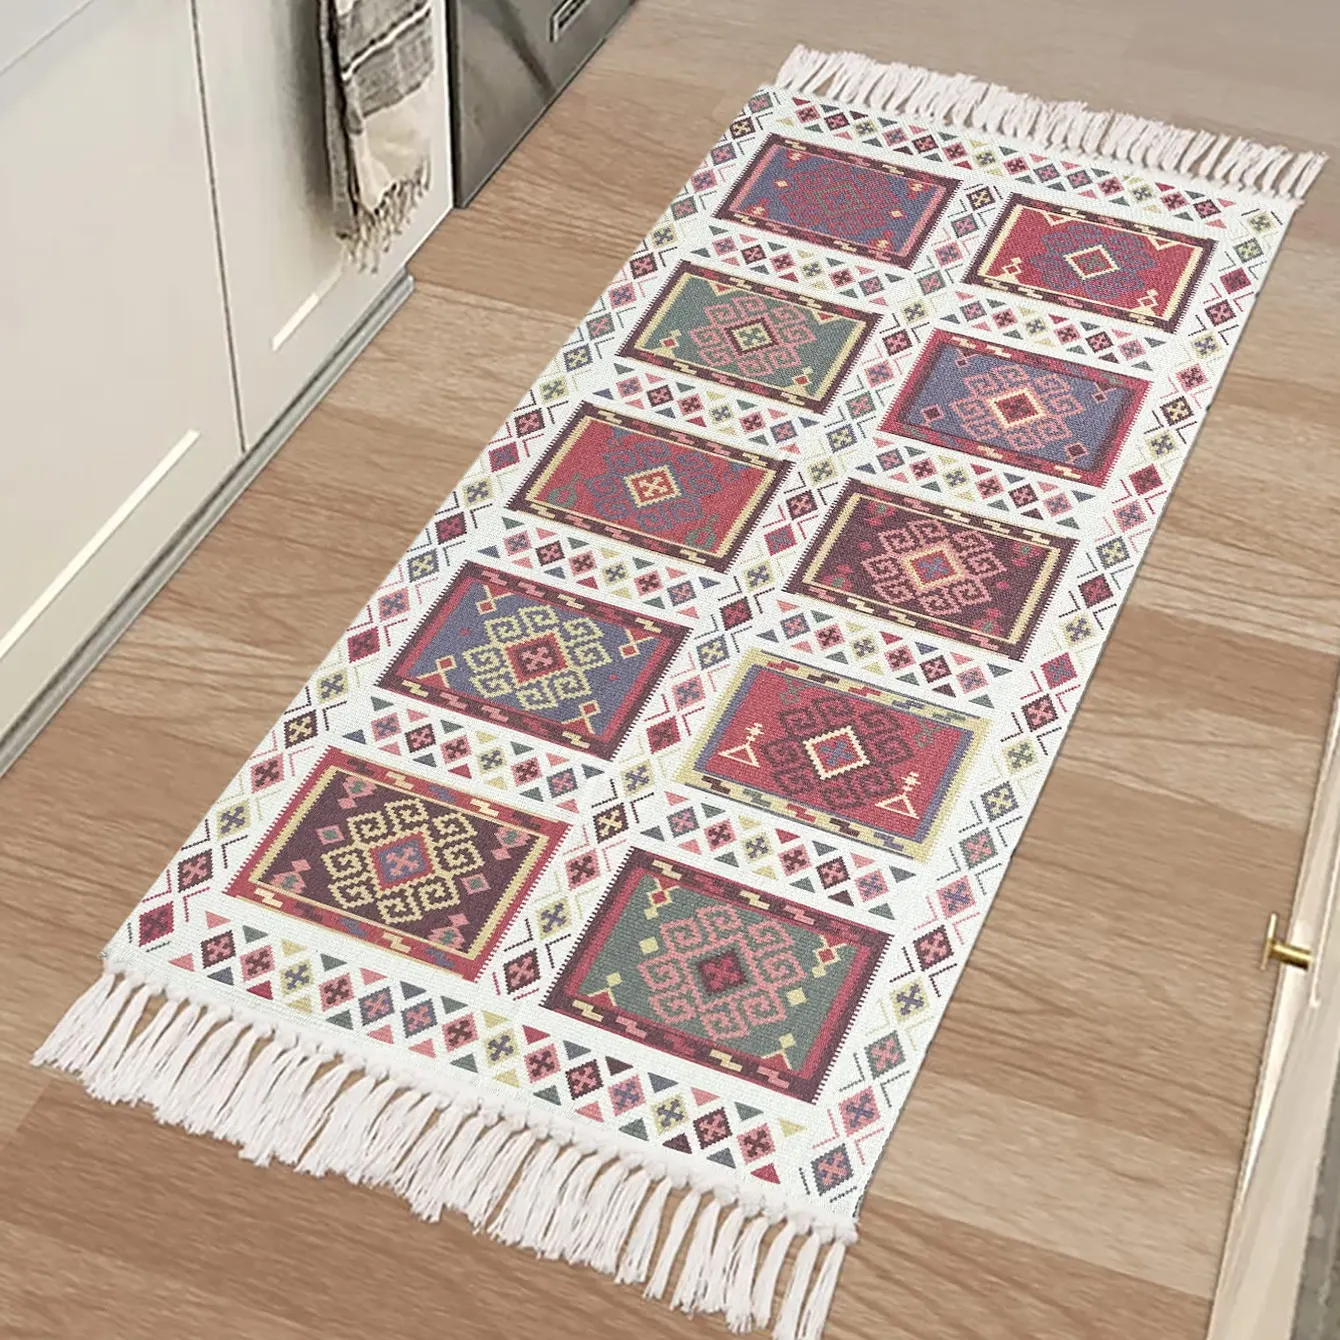 cheap price Cotton Printed Boho Kitchen Rugs Decorative red and White Rug Hand Woven Accent Floor Mat for Bathroom Bedroom